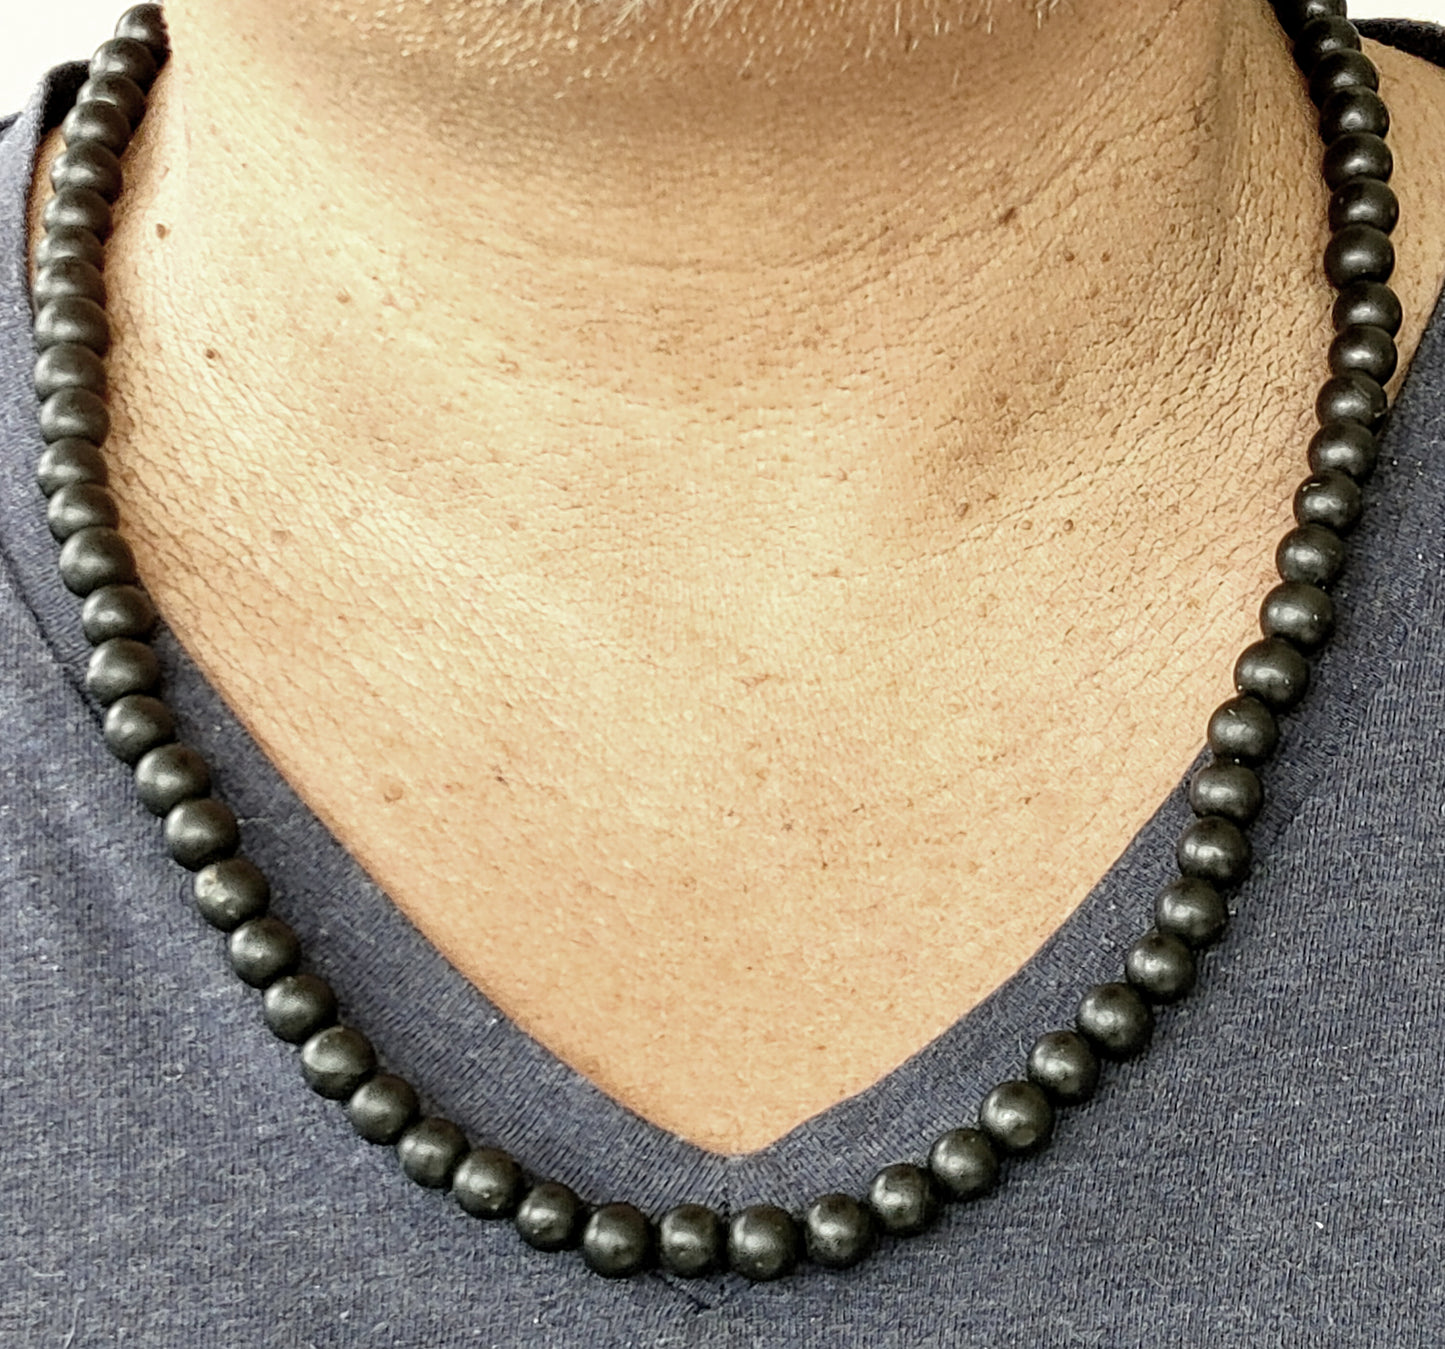 LBN5000 LONG BEADED NECKLACE "BLACK PEARLS" 76 BEADS - 50G TW